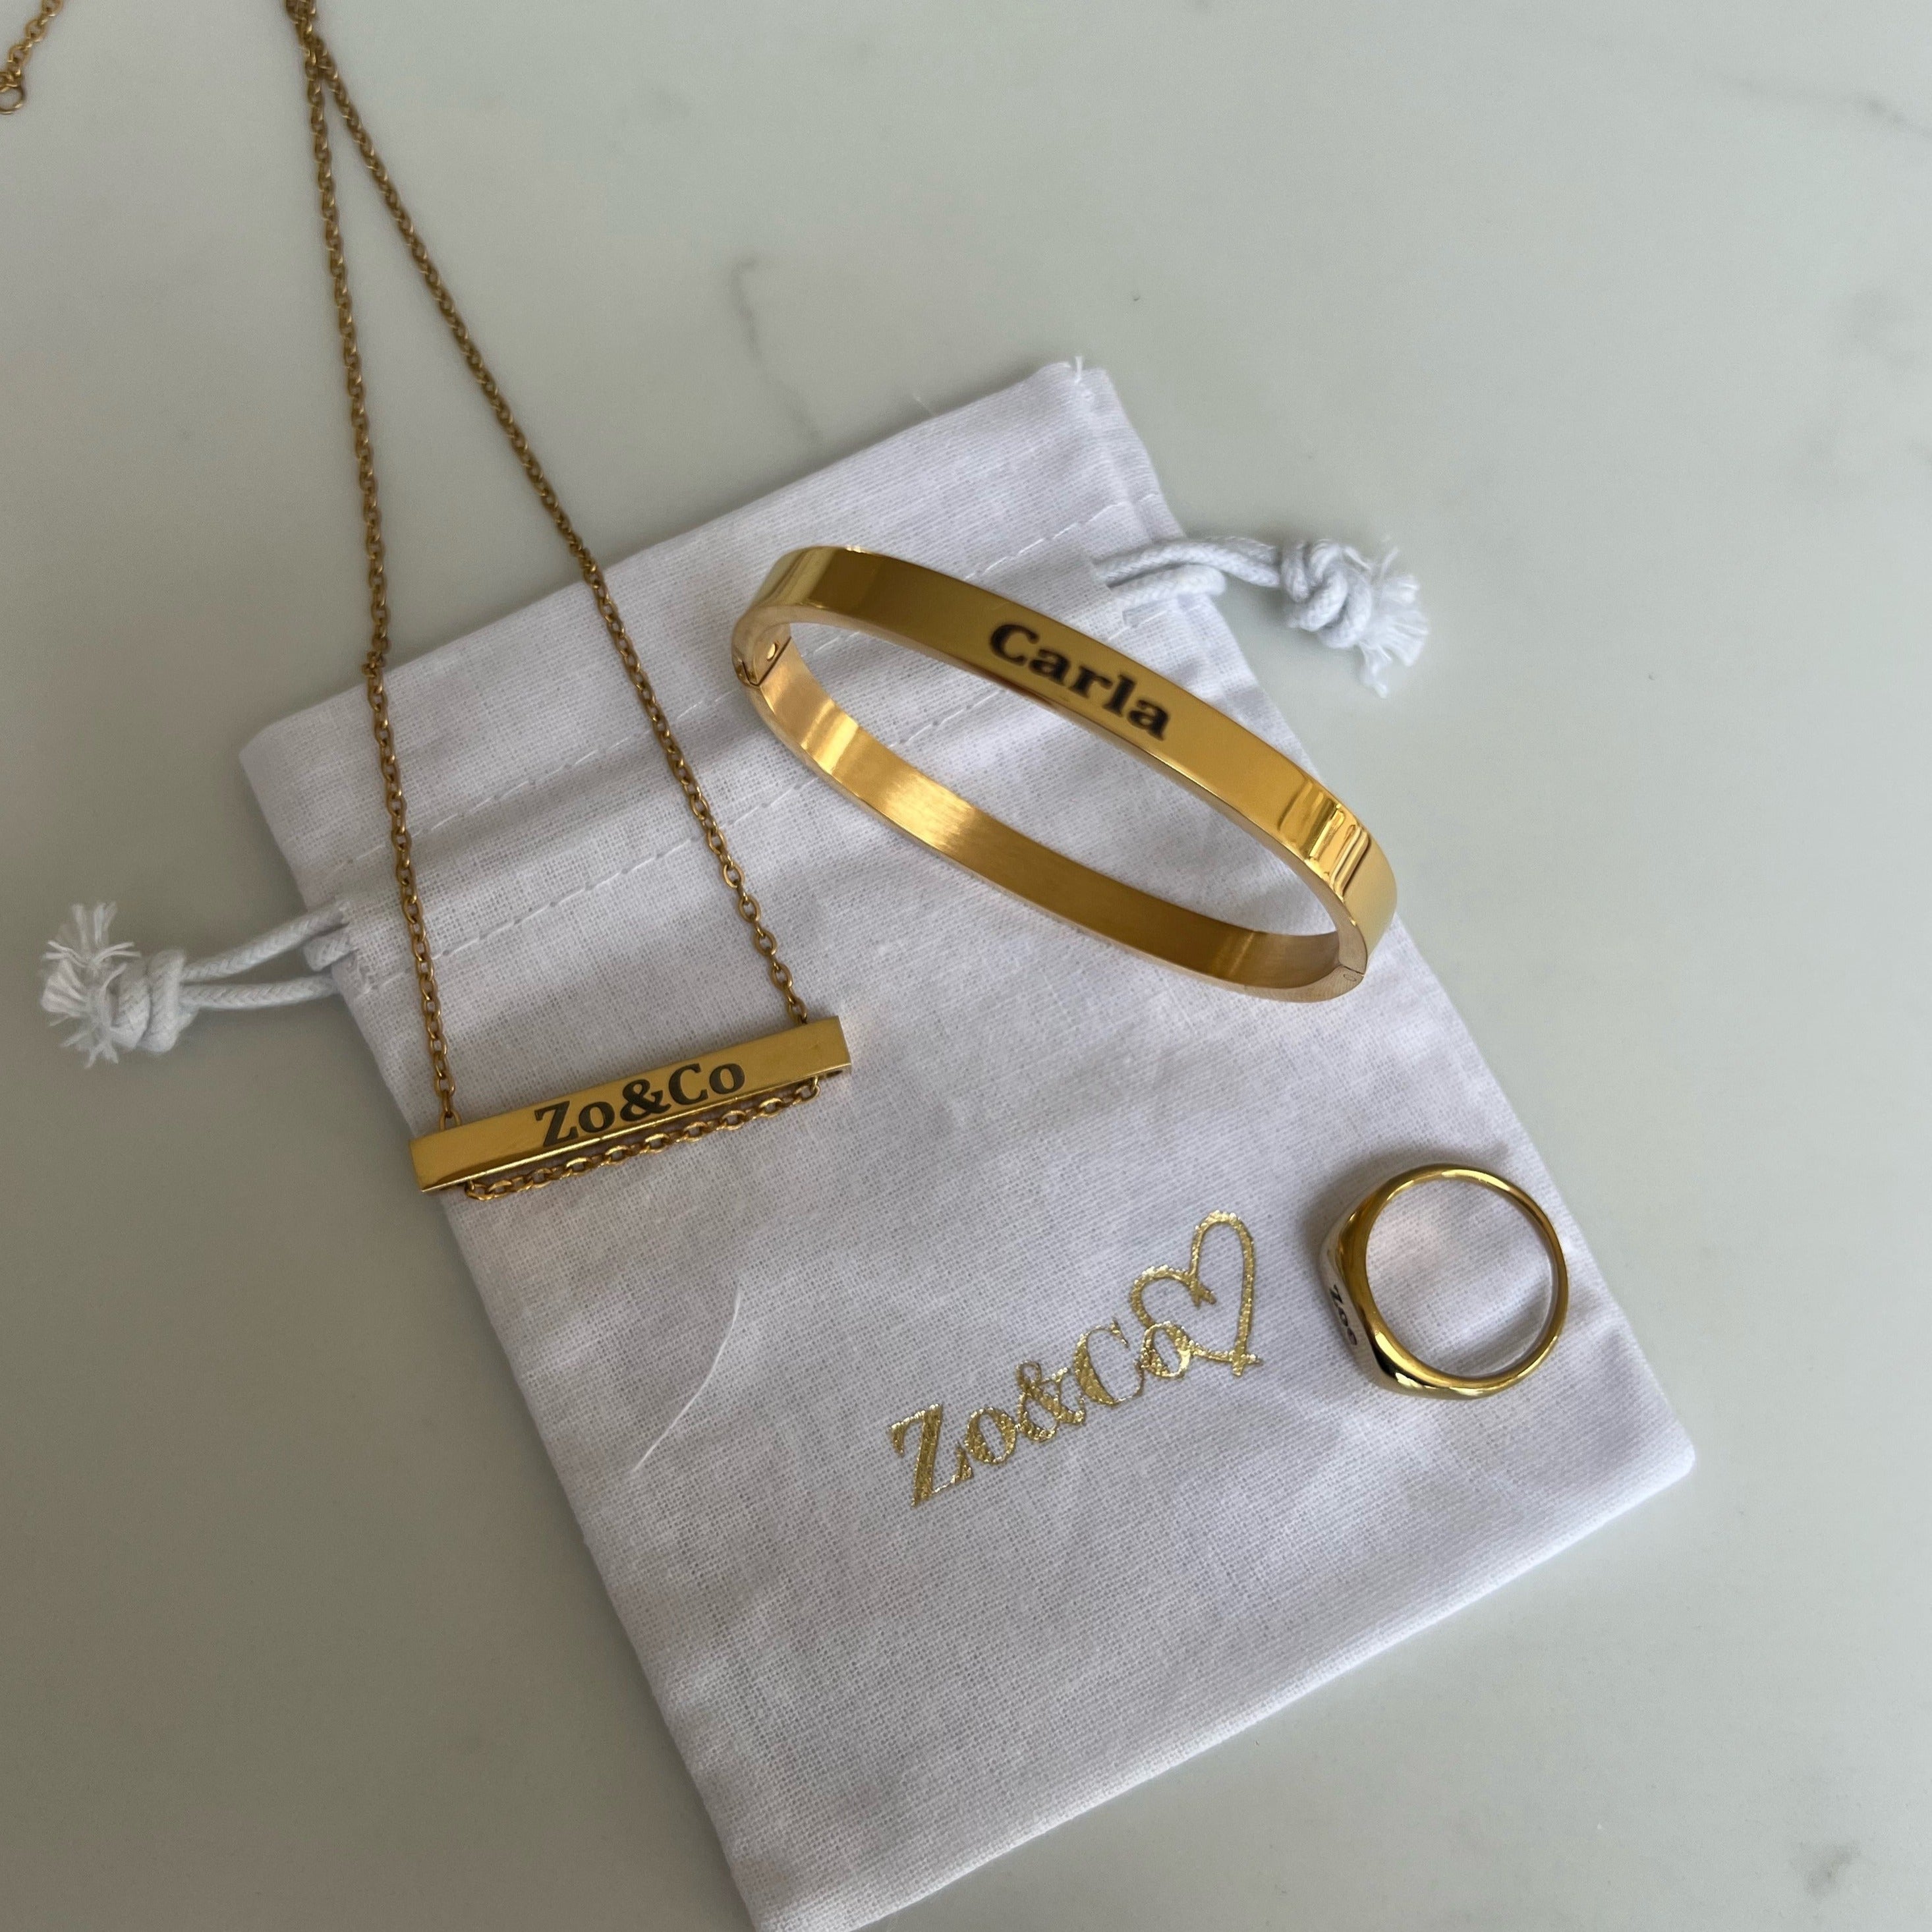 Introducing our Must have Staple piece from our Personalised Collection! All of our pieces are laser engraved- this means it will not fade over time! Available in Gold, Silver & Rose Gold. Material: Titanium.